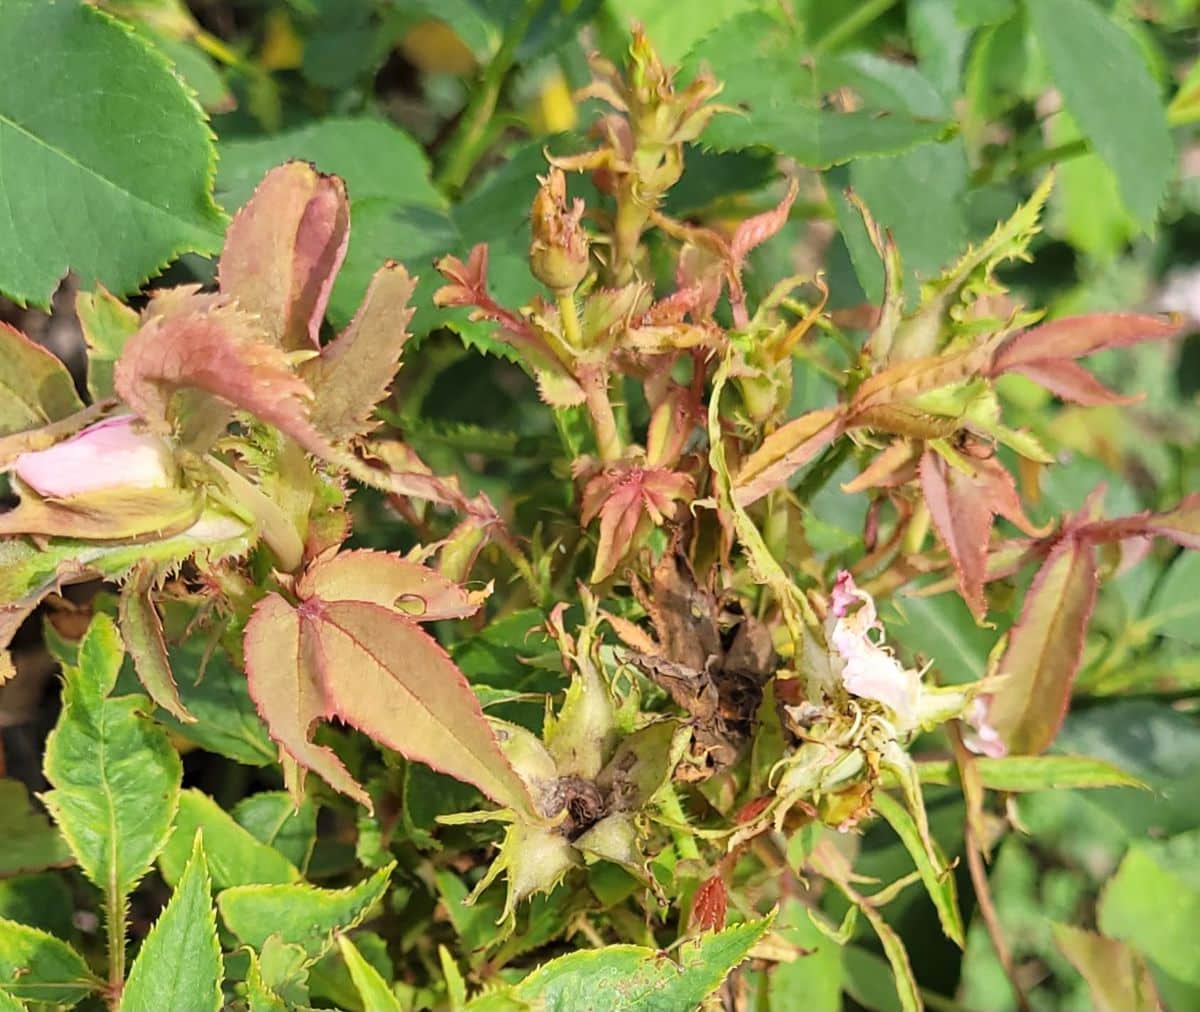 Affected rose leaves with Rose Rosette disease